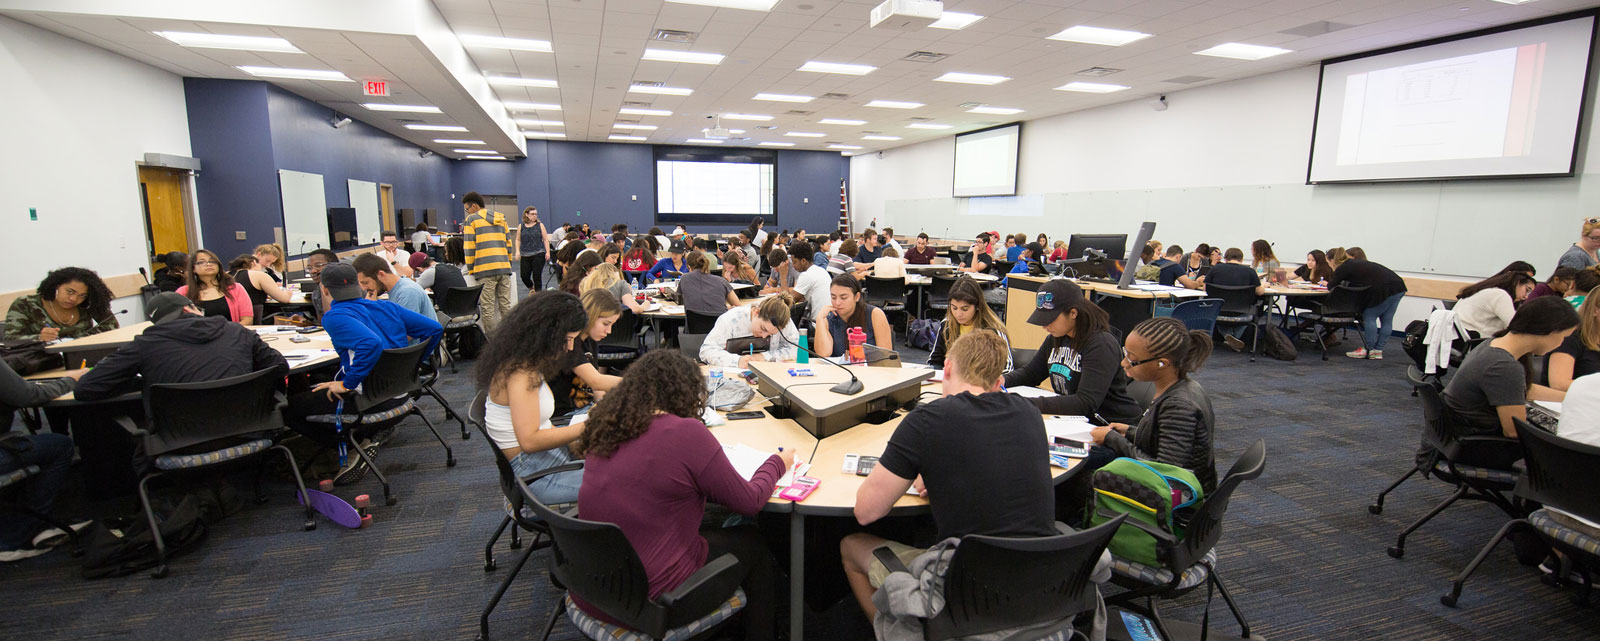 academics-active-learning-fiu-college-engineering-computing-1600x640